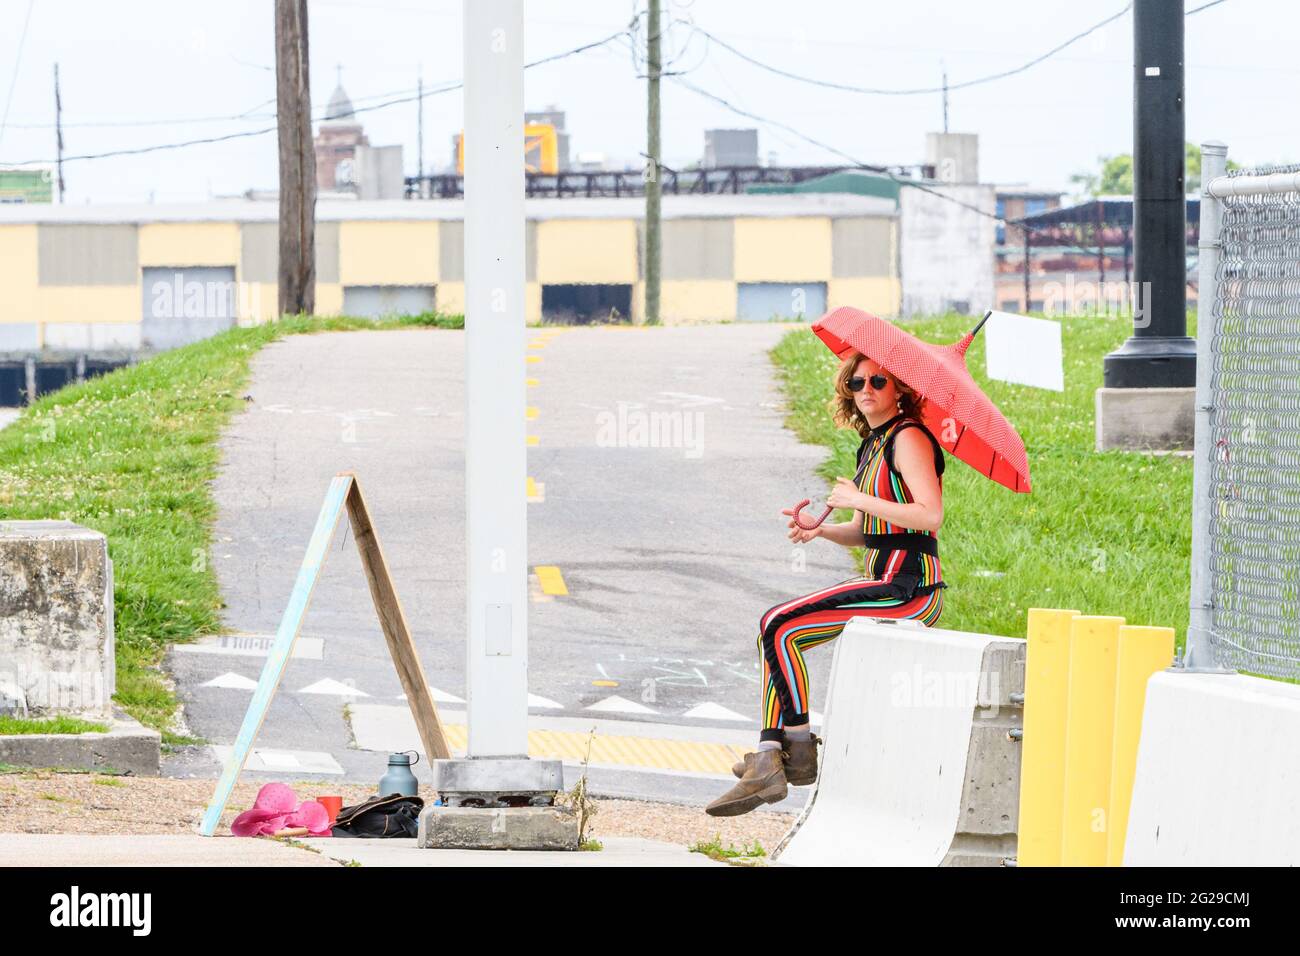 NEW ORLEANS, LA, USA - MAY 9, 2021: Woman in colorful pant suit sits on concrete barricade holding an umbrella Stock Photo